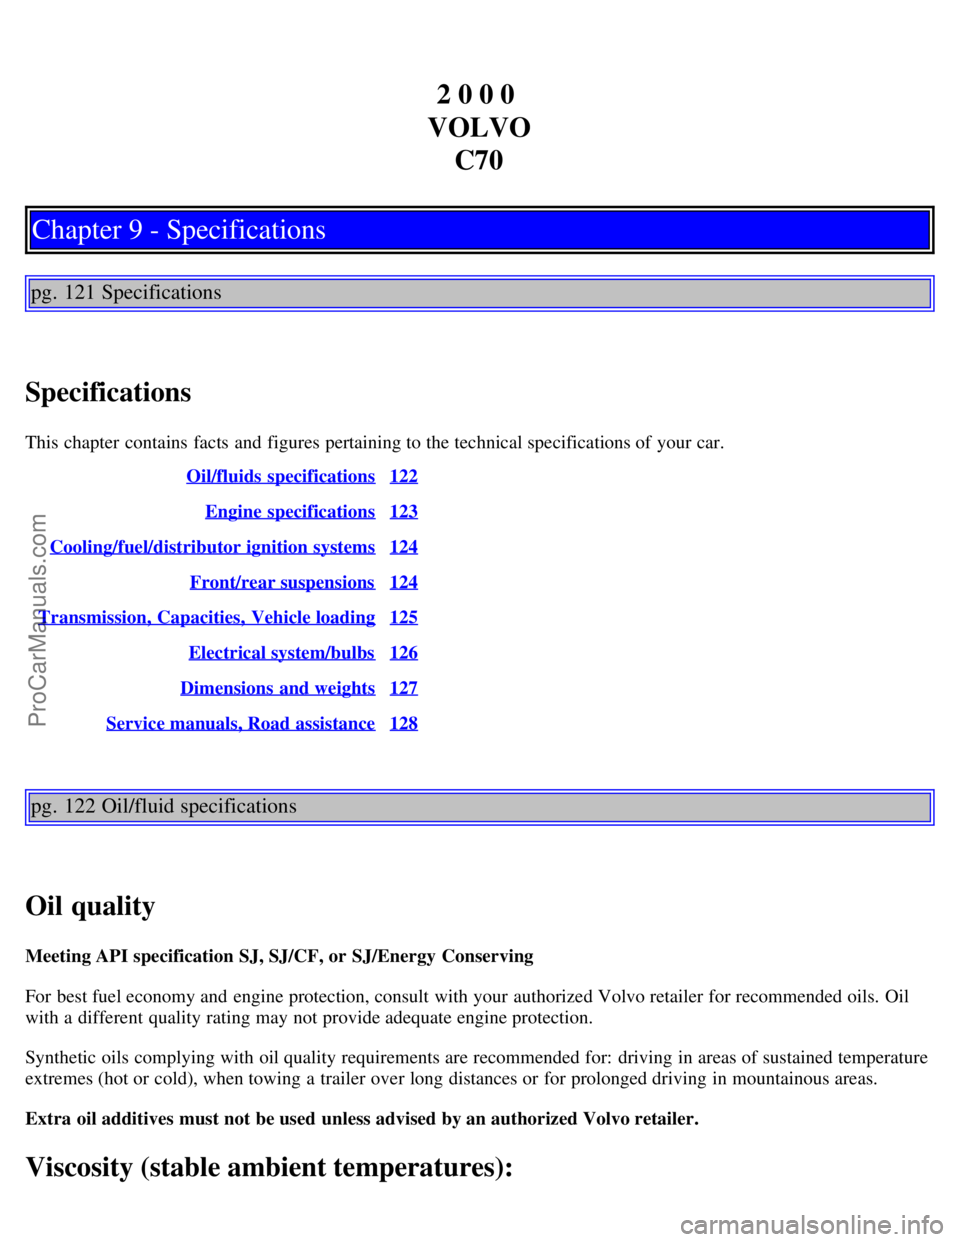 VOLVO C70 2000  Owners Manual 2 0 0 0 
VOLVO C70
Chapter 9 - Specifications
pg. 121 Specifications
Specifications
This chapter  contains facts and  figures pertaining to the technical specifications of your car. Oil/fluids  specif